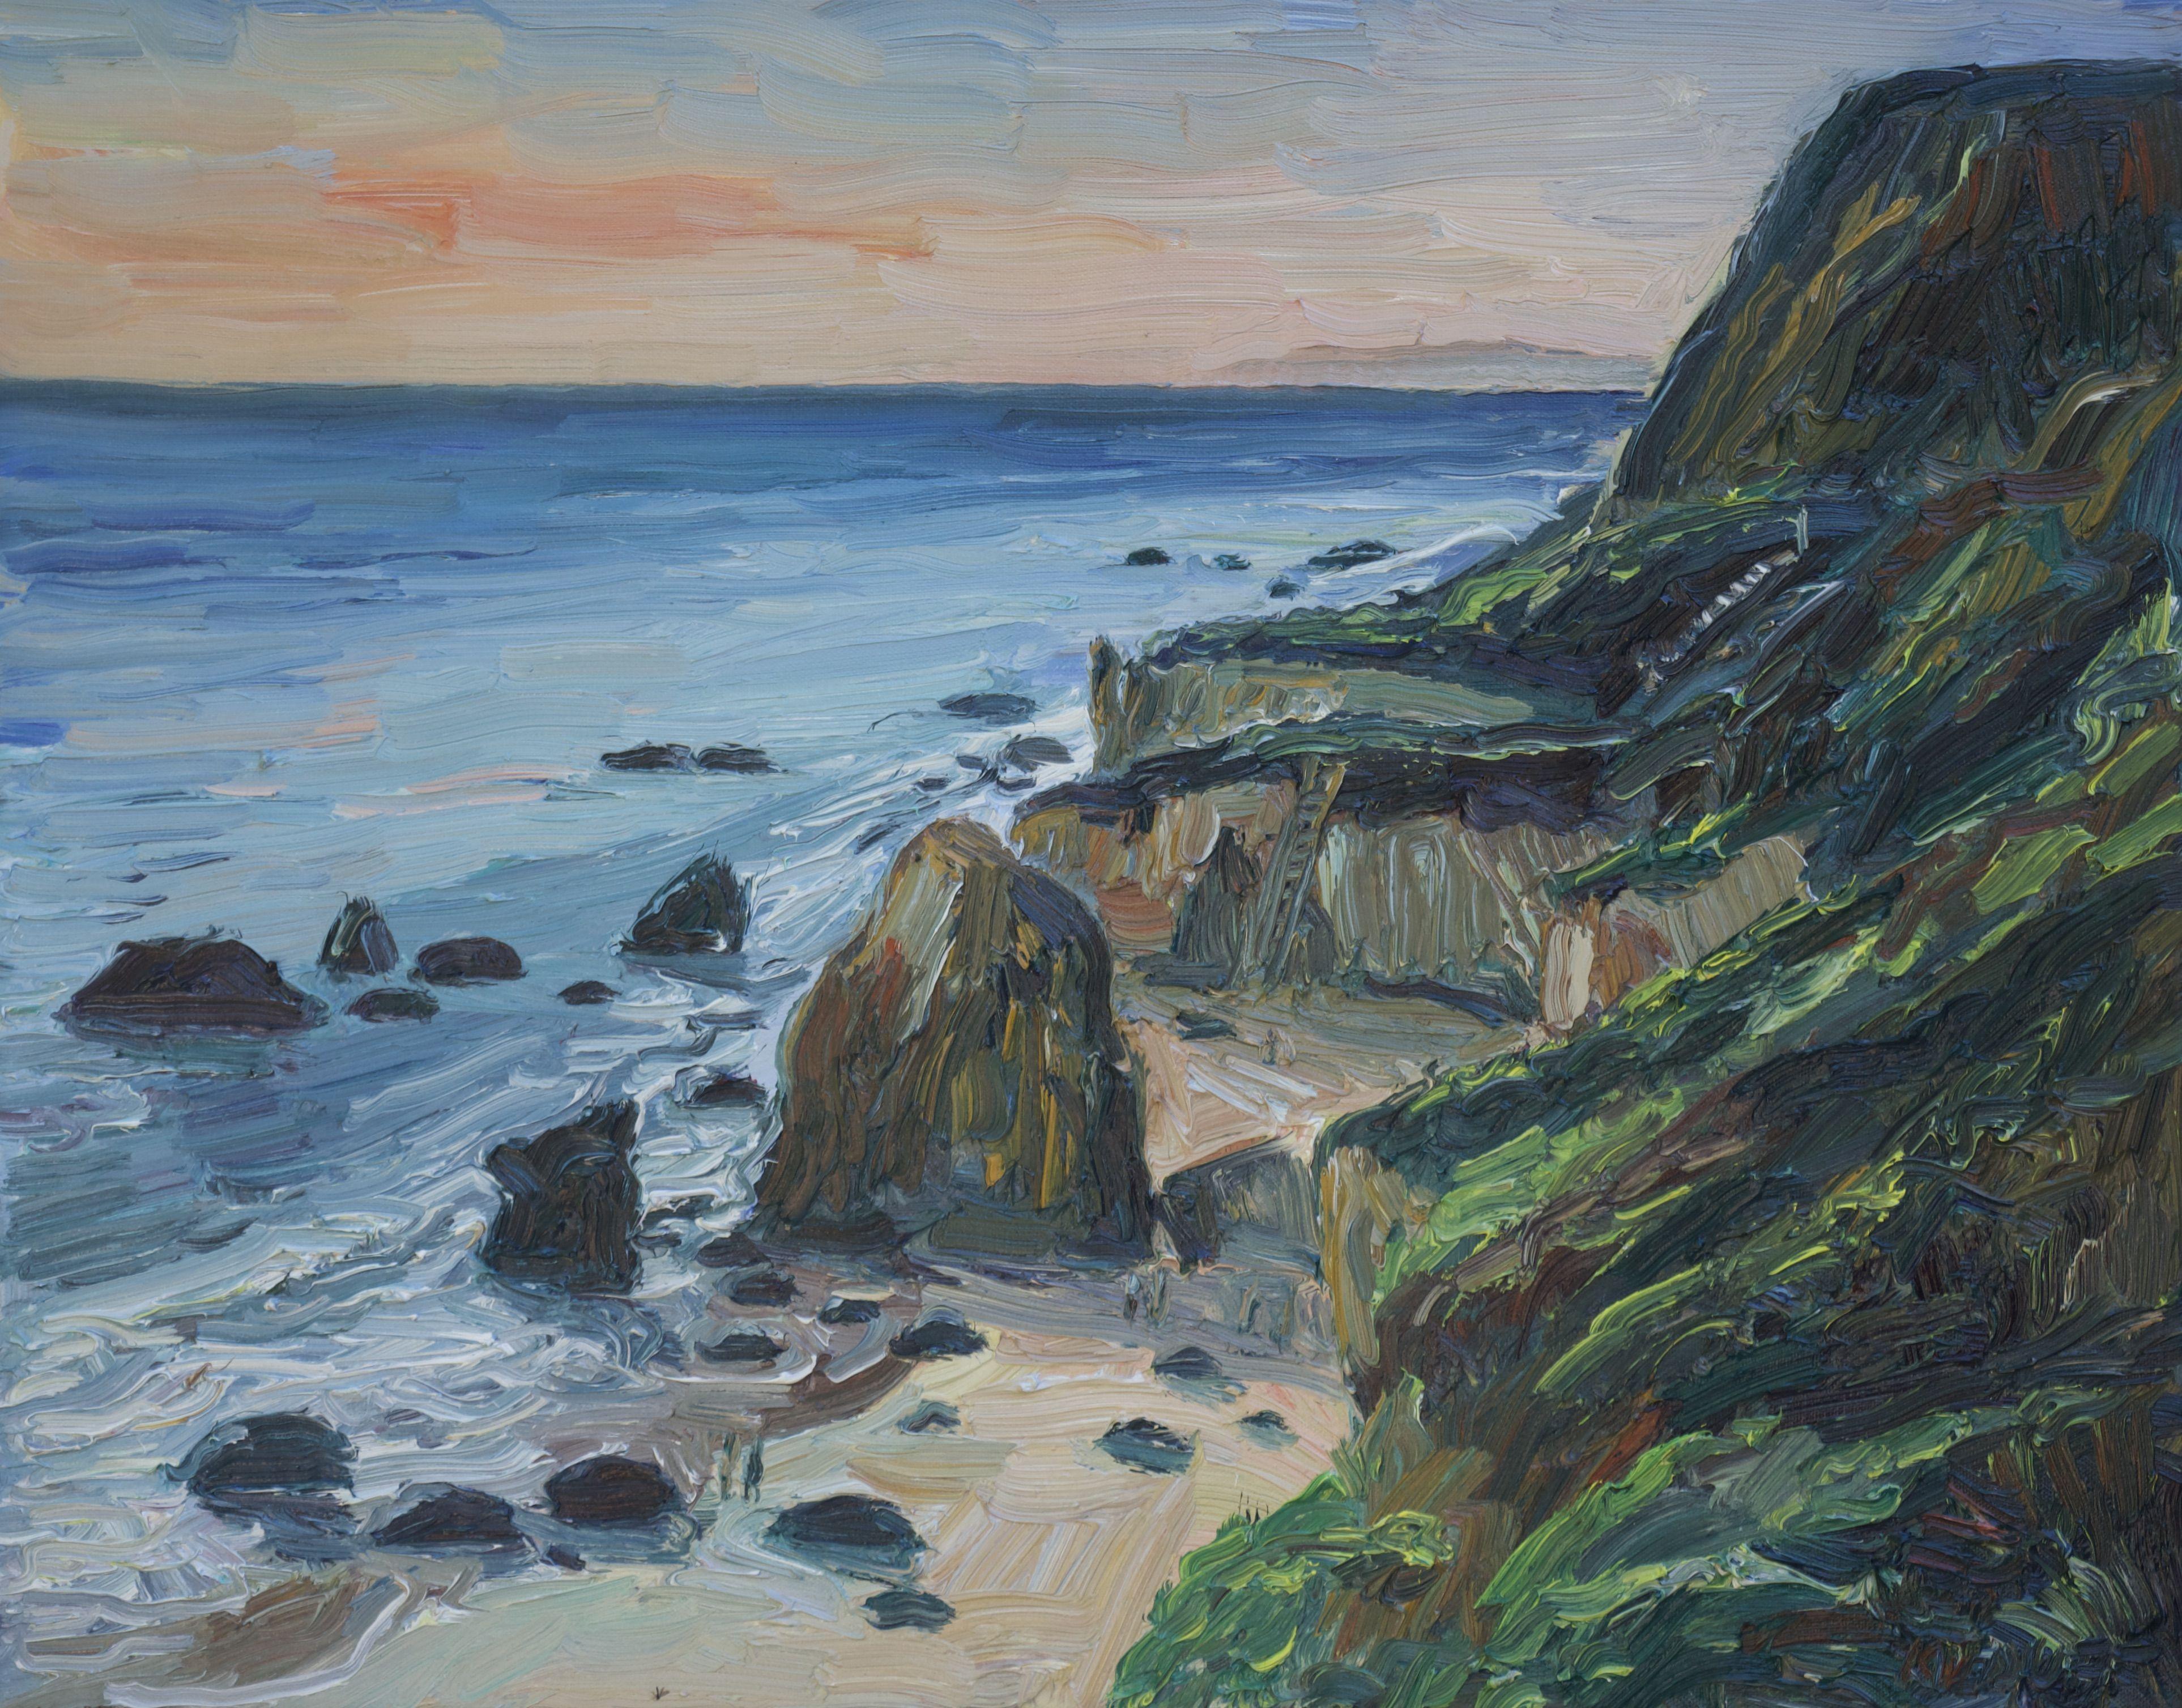 Plein air oil painting of Matador Beach in Malibu, California.  :: Painting :: Impressionist :: This piece comes with an official certificate of authenticity signed by the artist :: Ready to Hang: No :: Signed: Yes :: Signature Location: On the back